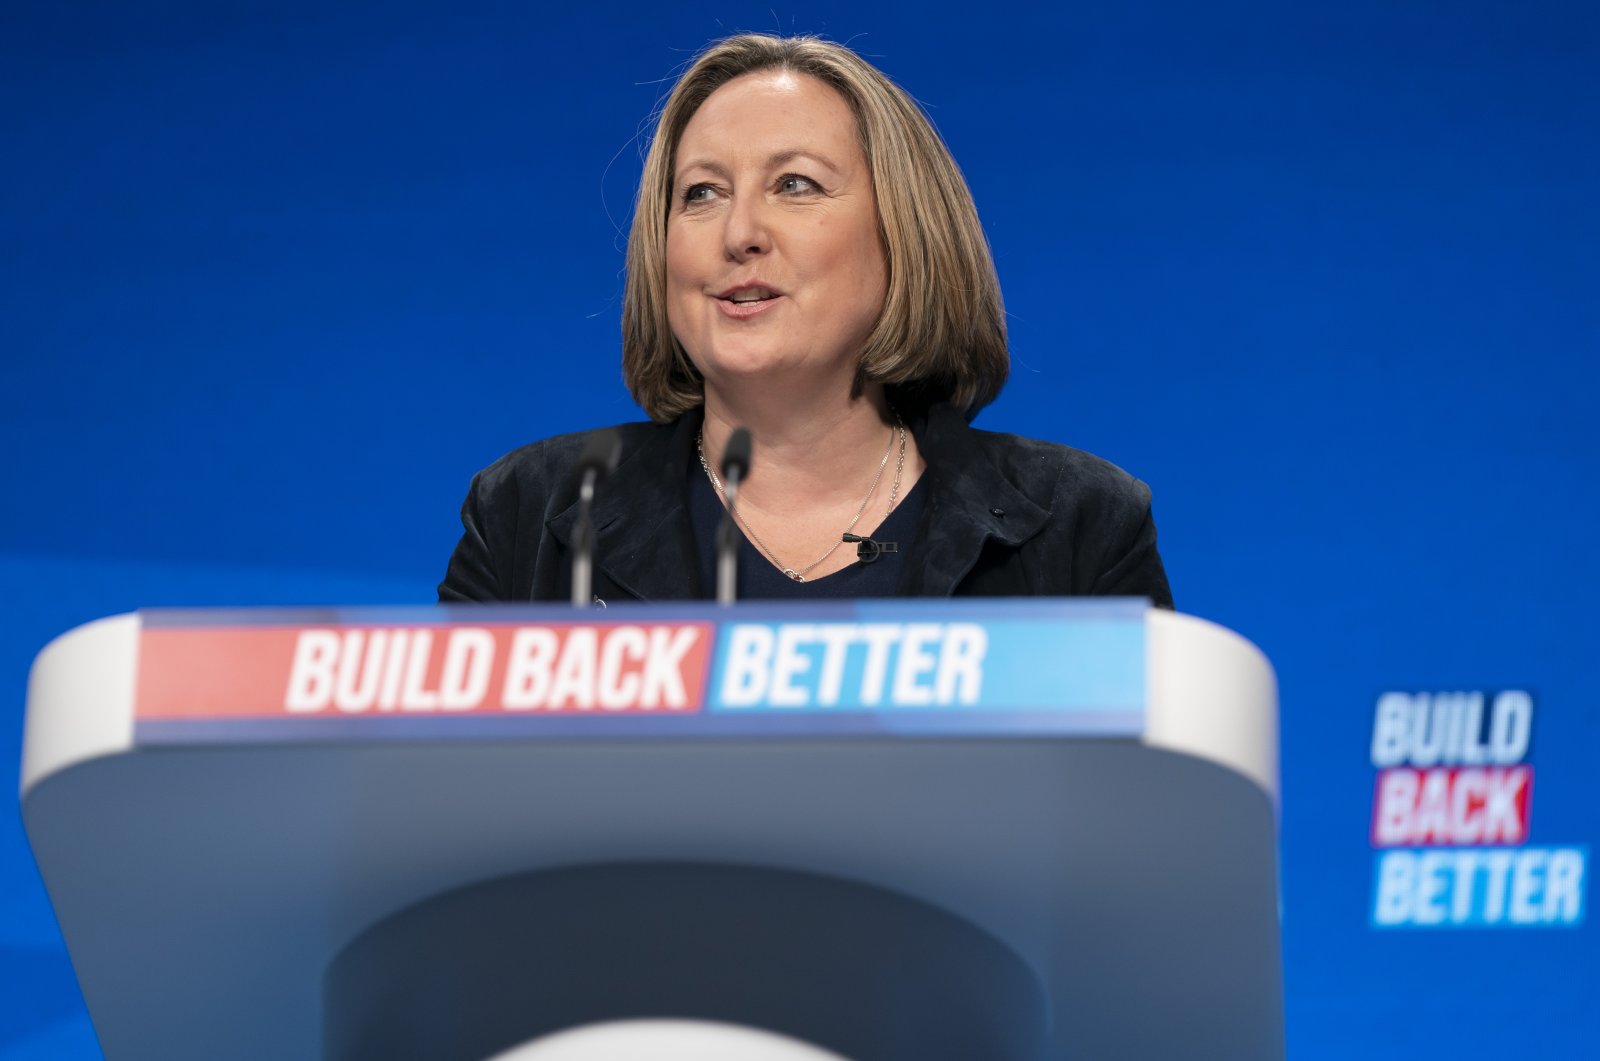 U.K. Secretary of State for International Trade, Anne-Marie Trevelyan, speaks at the Conservative Party Conference in Manchester, England, Oct. 3, 2021. (AP Photo)